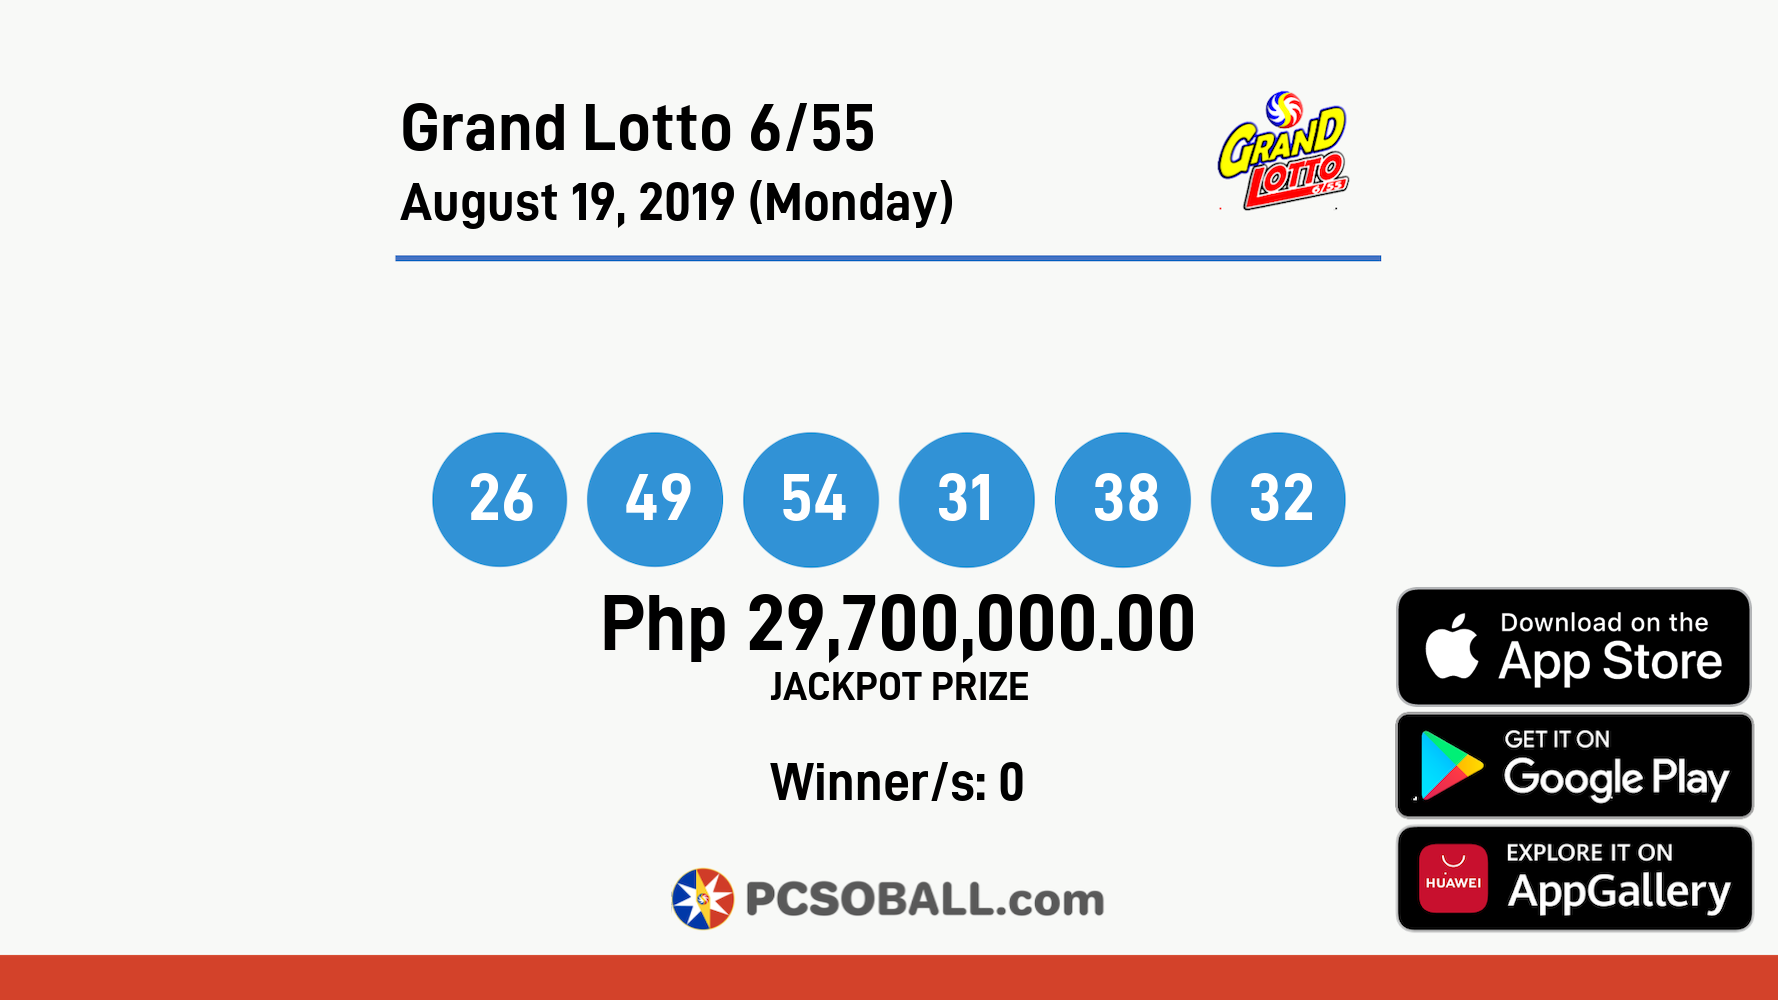 Grand Lotto 6/55 August 19, 2019 (Monday) Result